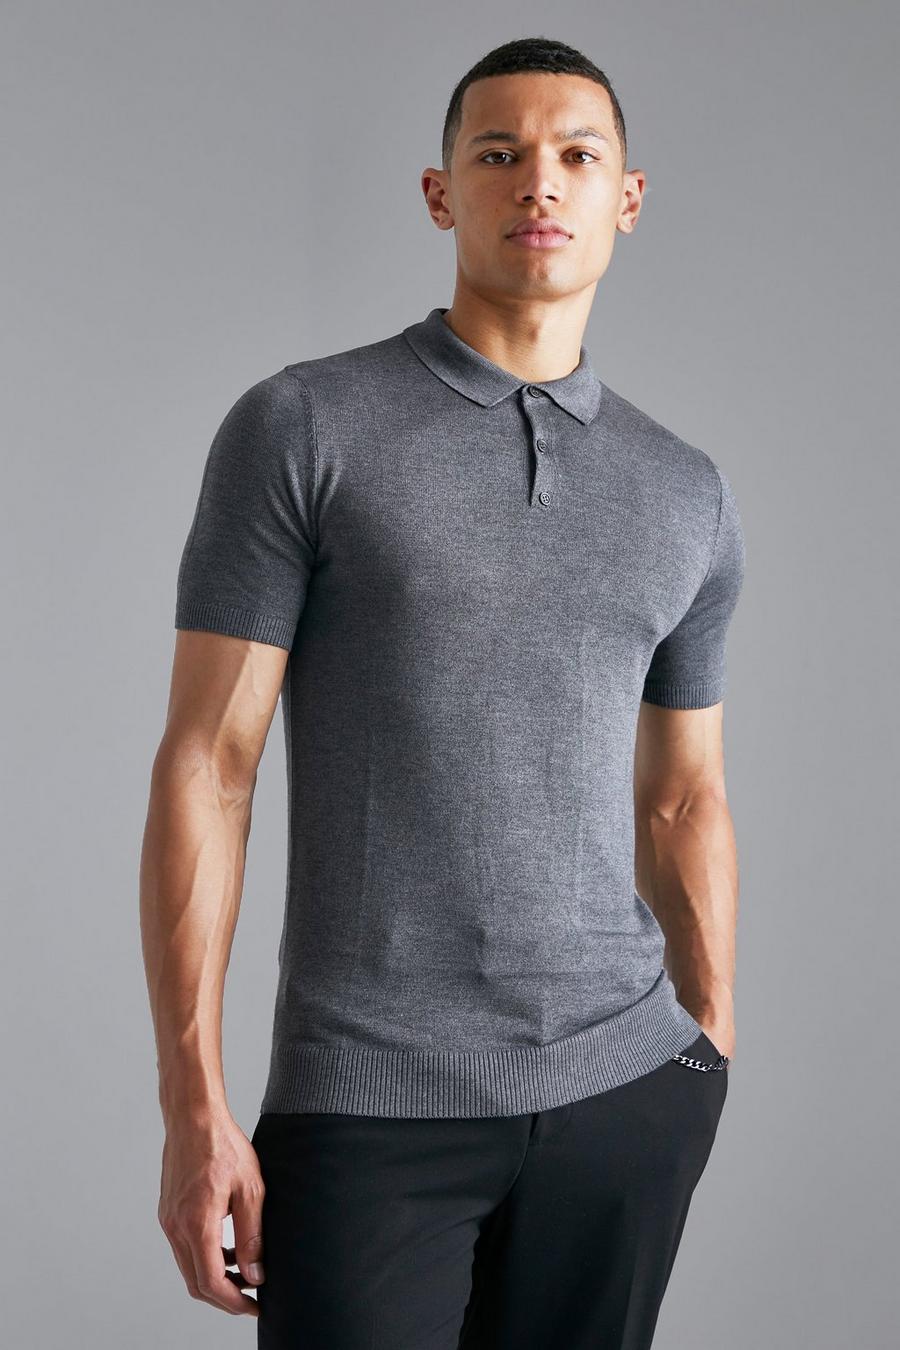 Charcoal gris Tall Gerecyclede Gebreide Muscle Fit Polo